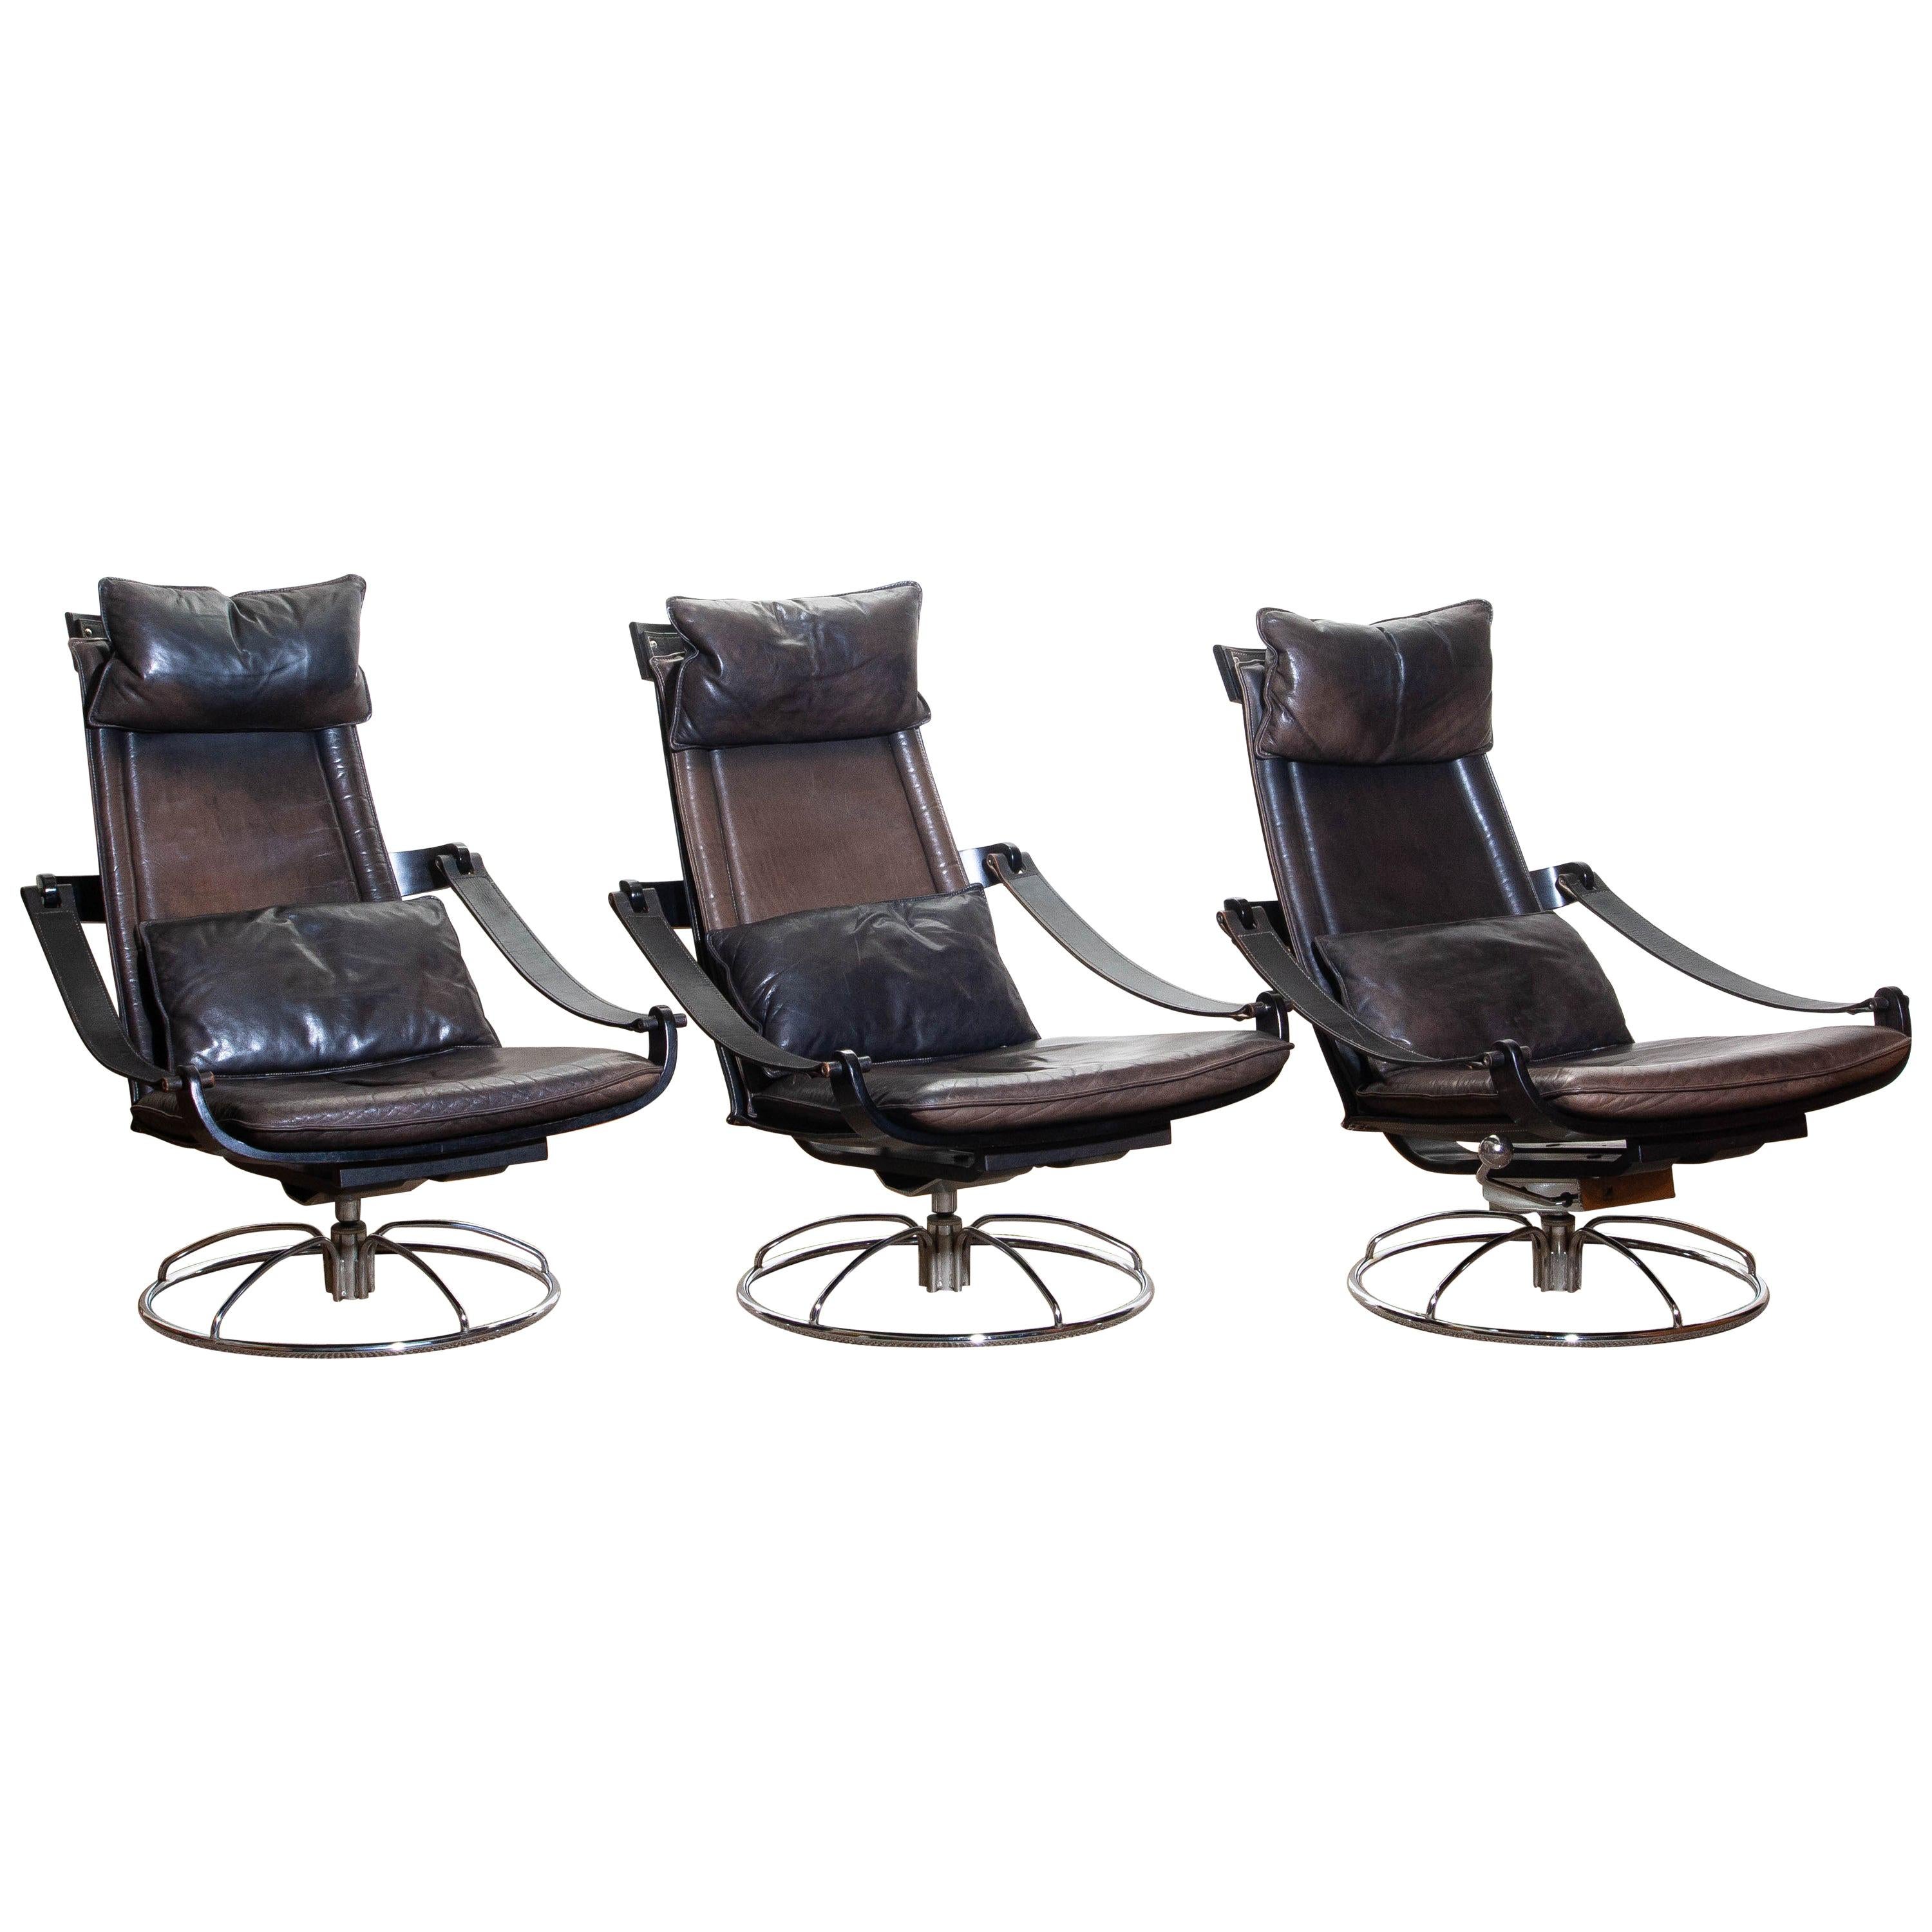 Swedish 1970s, Three Leather Swivel / Relax Chairs by Ake Fribytter for Nelo, Sweden